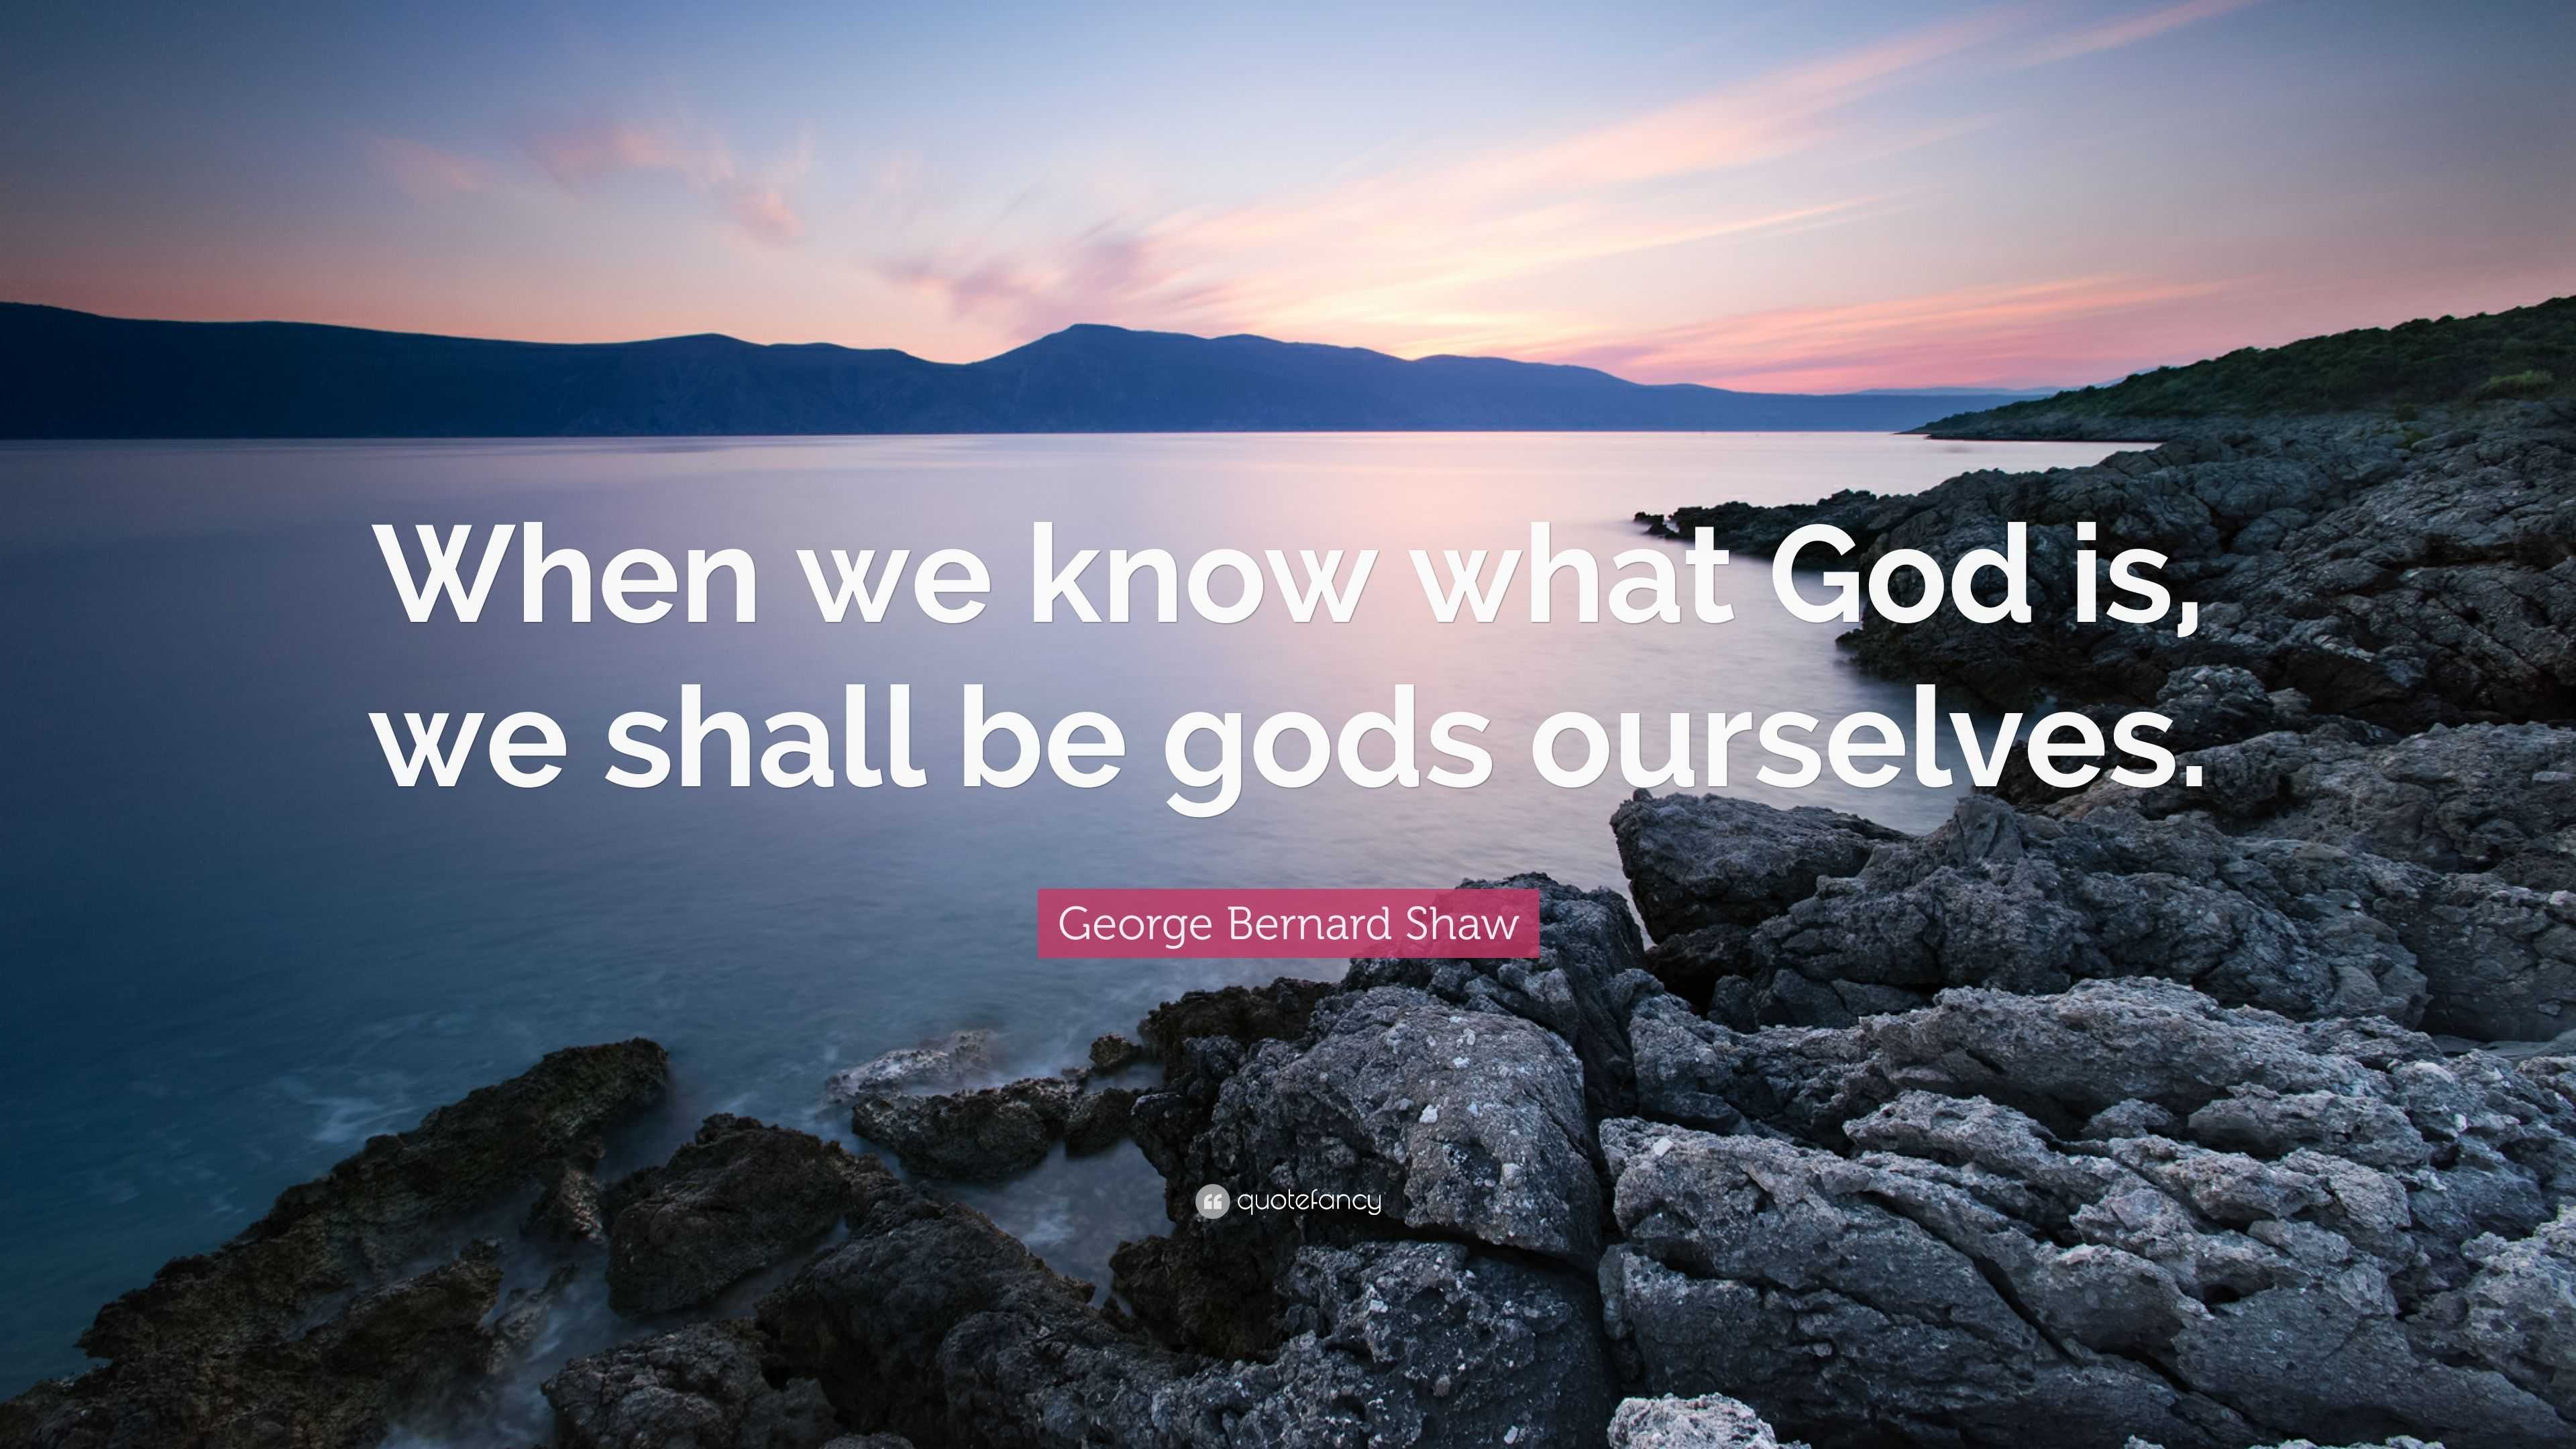 George Bernard Shaw Quote: “When we know what God is, we shall be gods ...